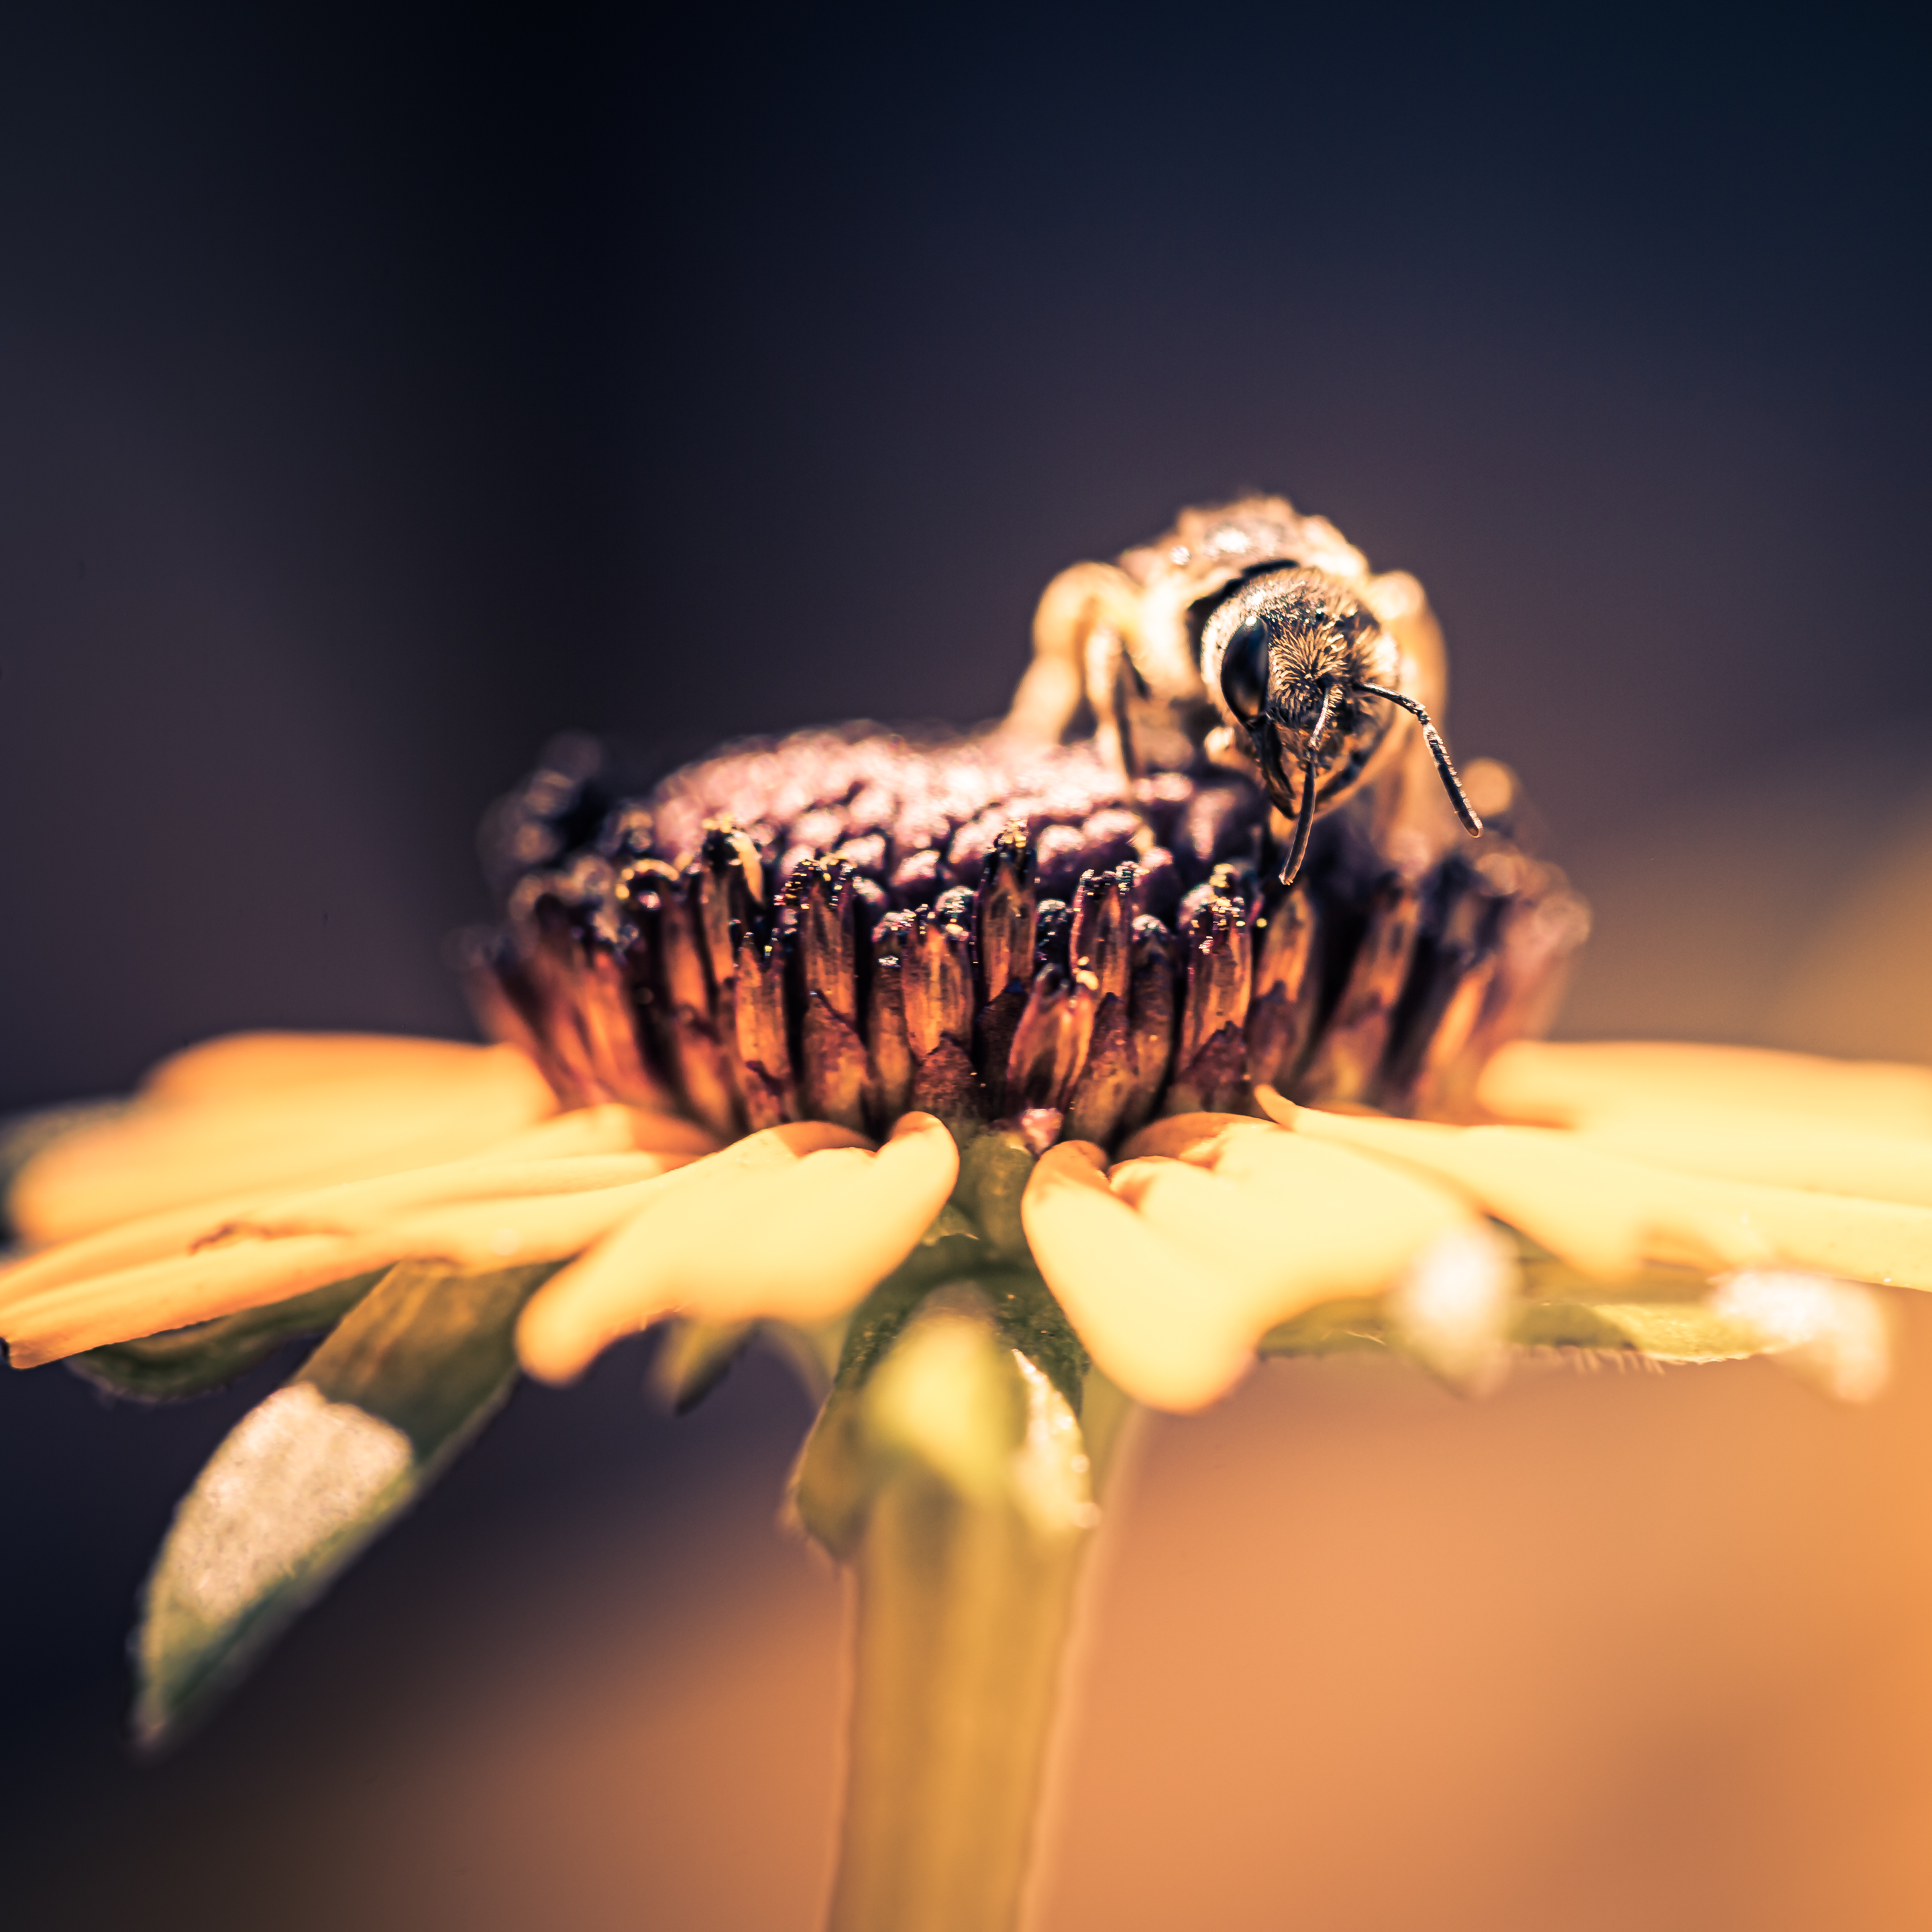 100mm square format macro photo of a honey bee pollenating a black-eyed susan flower blossom.